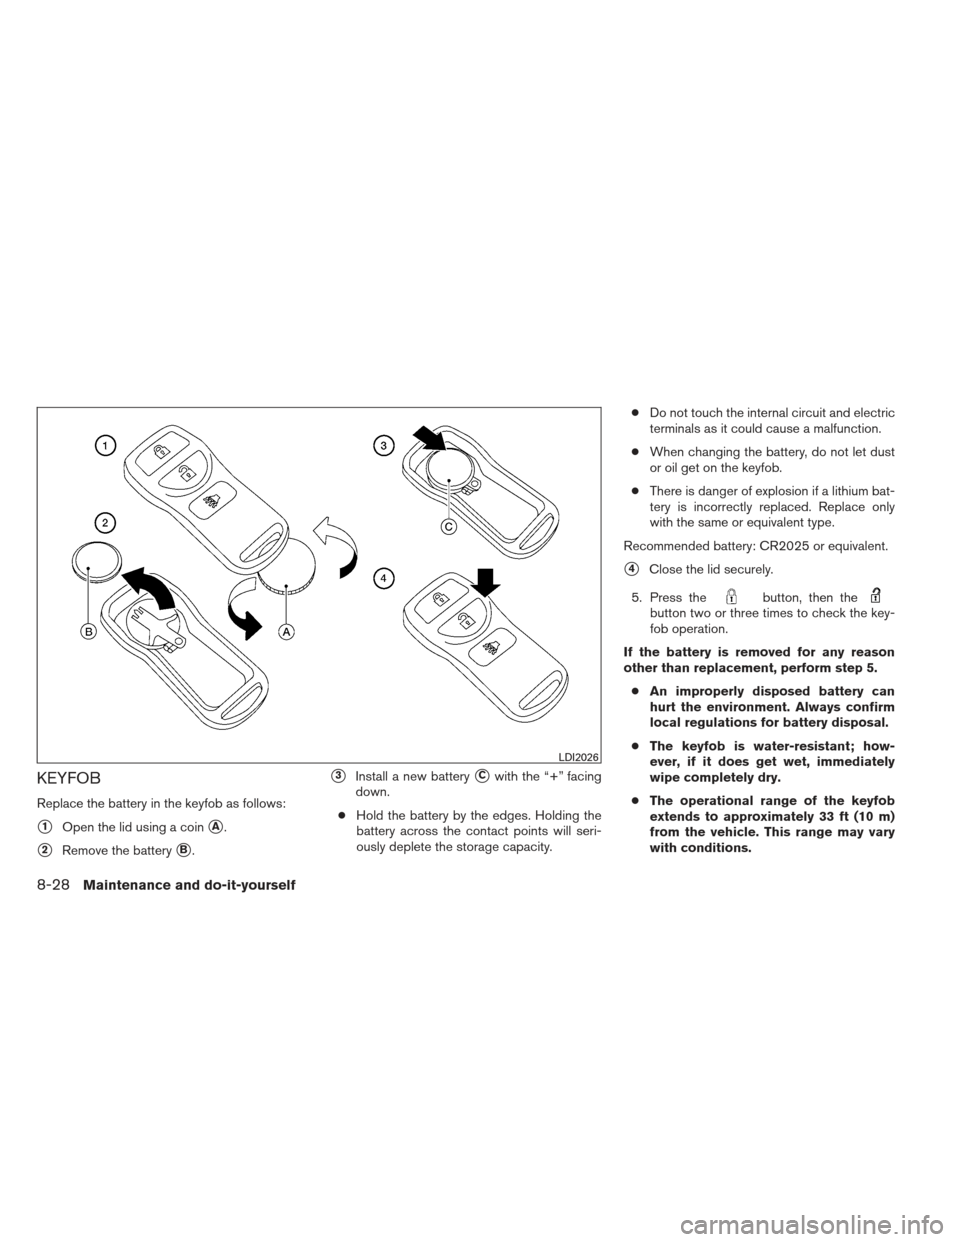 NISSAN XTERRA 2013 N50 / 2.G Owners Manual KEYFOB
Replace the battery in the keyfob as follows:
1Open the lid using a coinA.
2Remove the batteryB.
3Install a new batteryCwith the “+” facing
down.
● Hold the battery by the edges. Ho